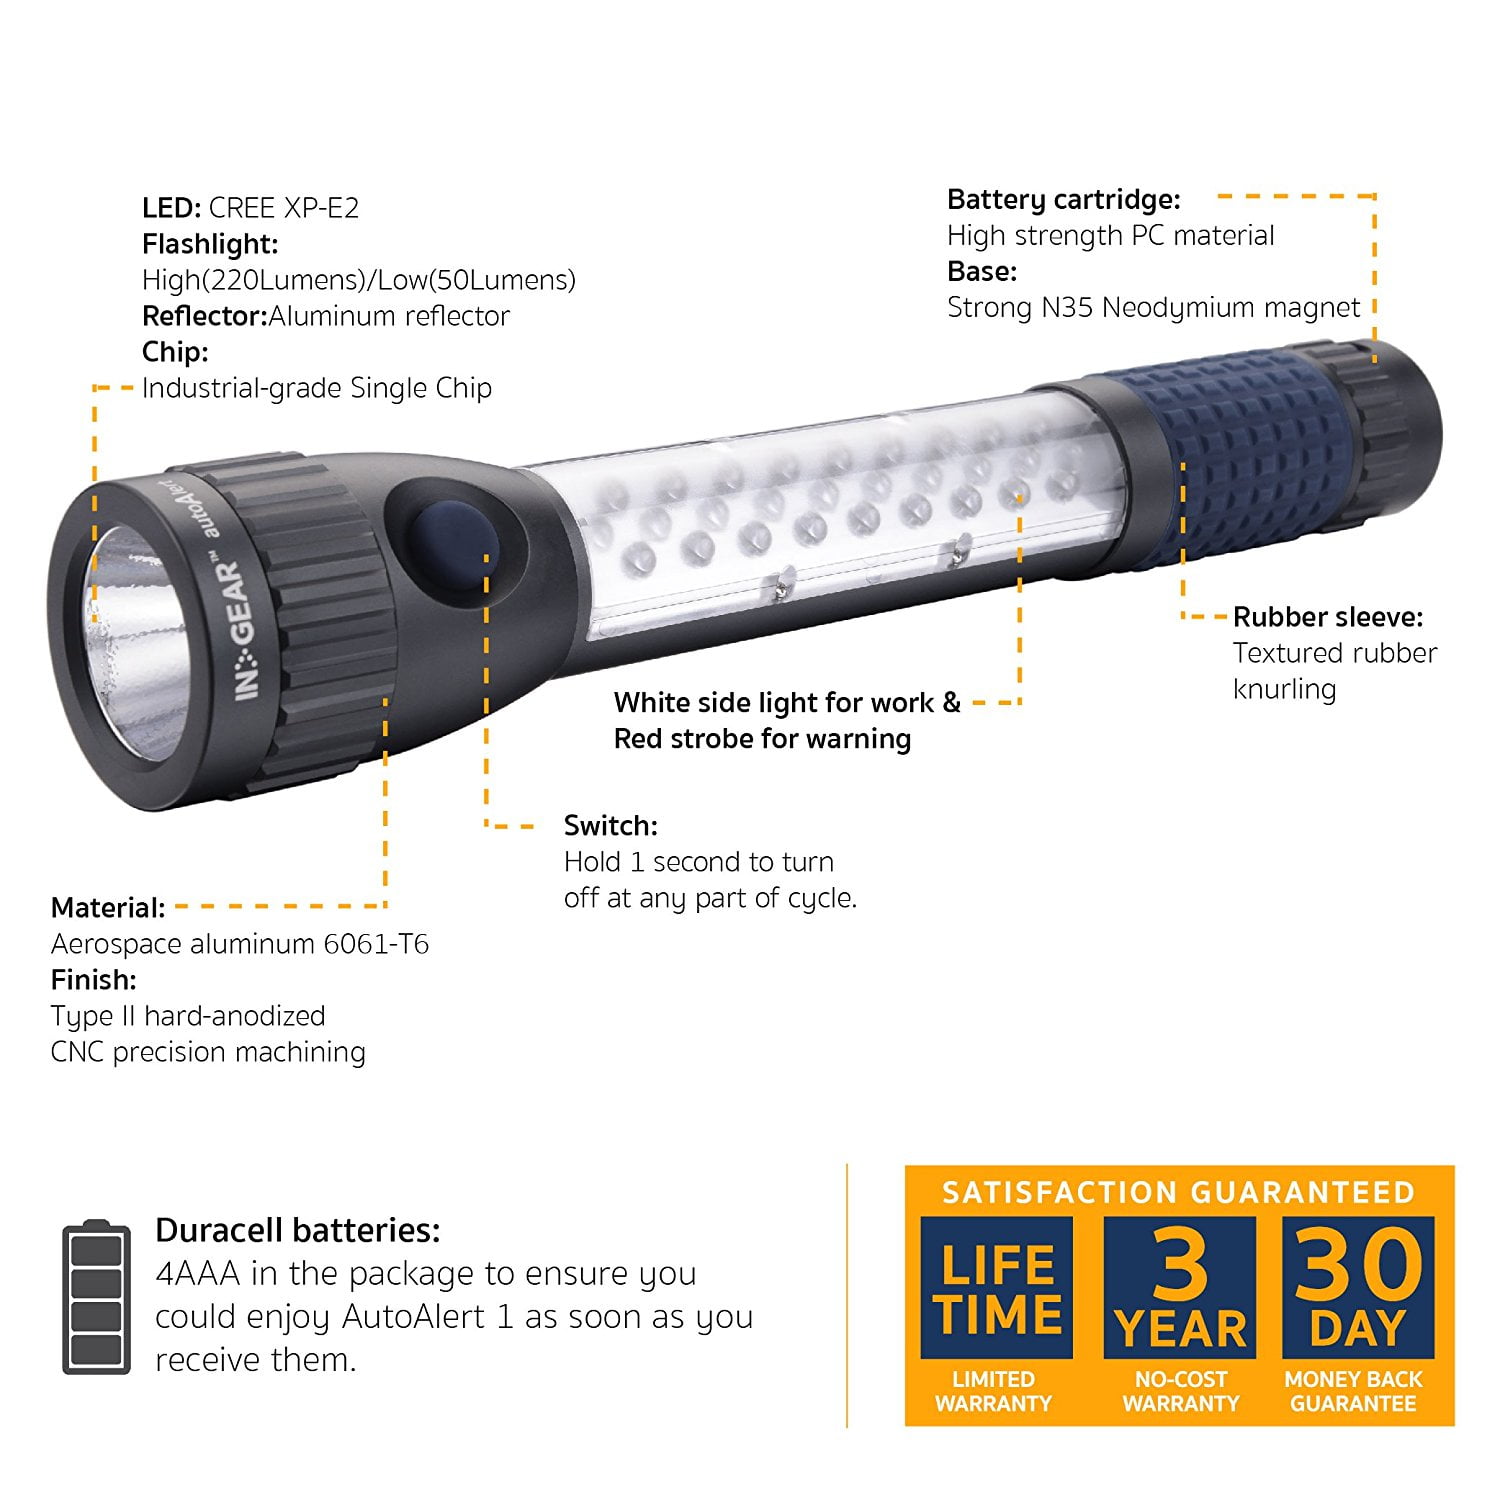 LED Torch 4 Way Light Batteries Included Extra Long Life LED's New 